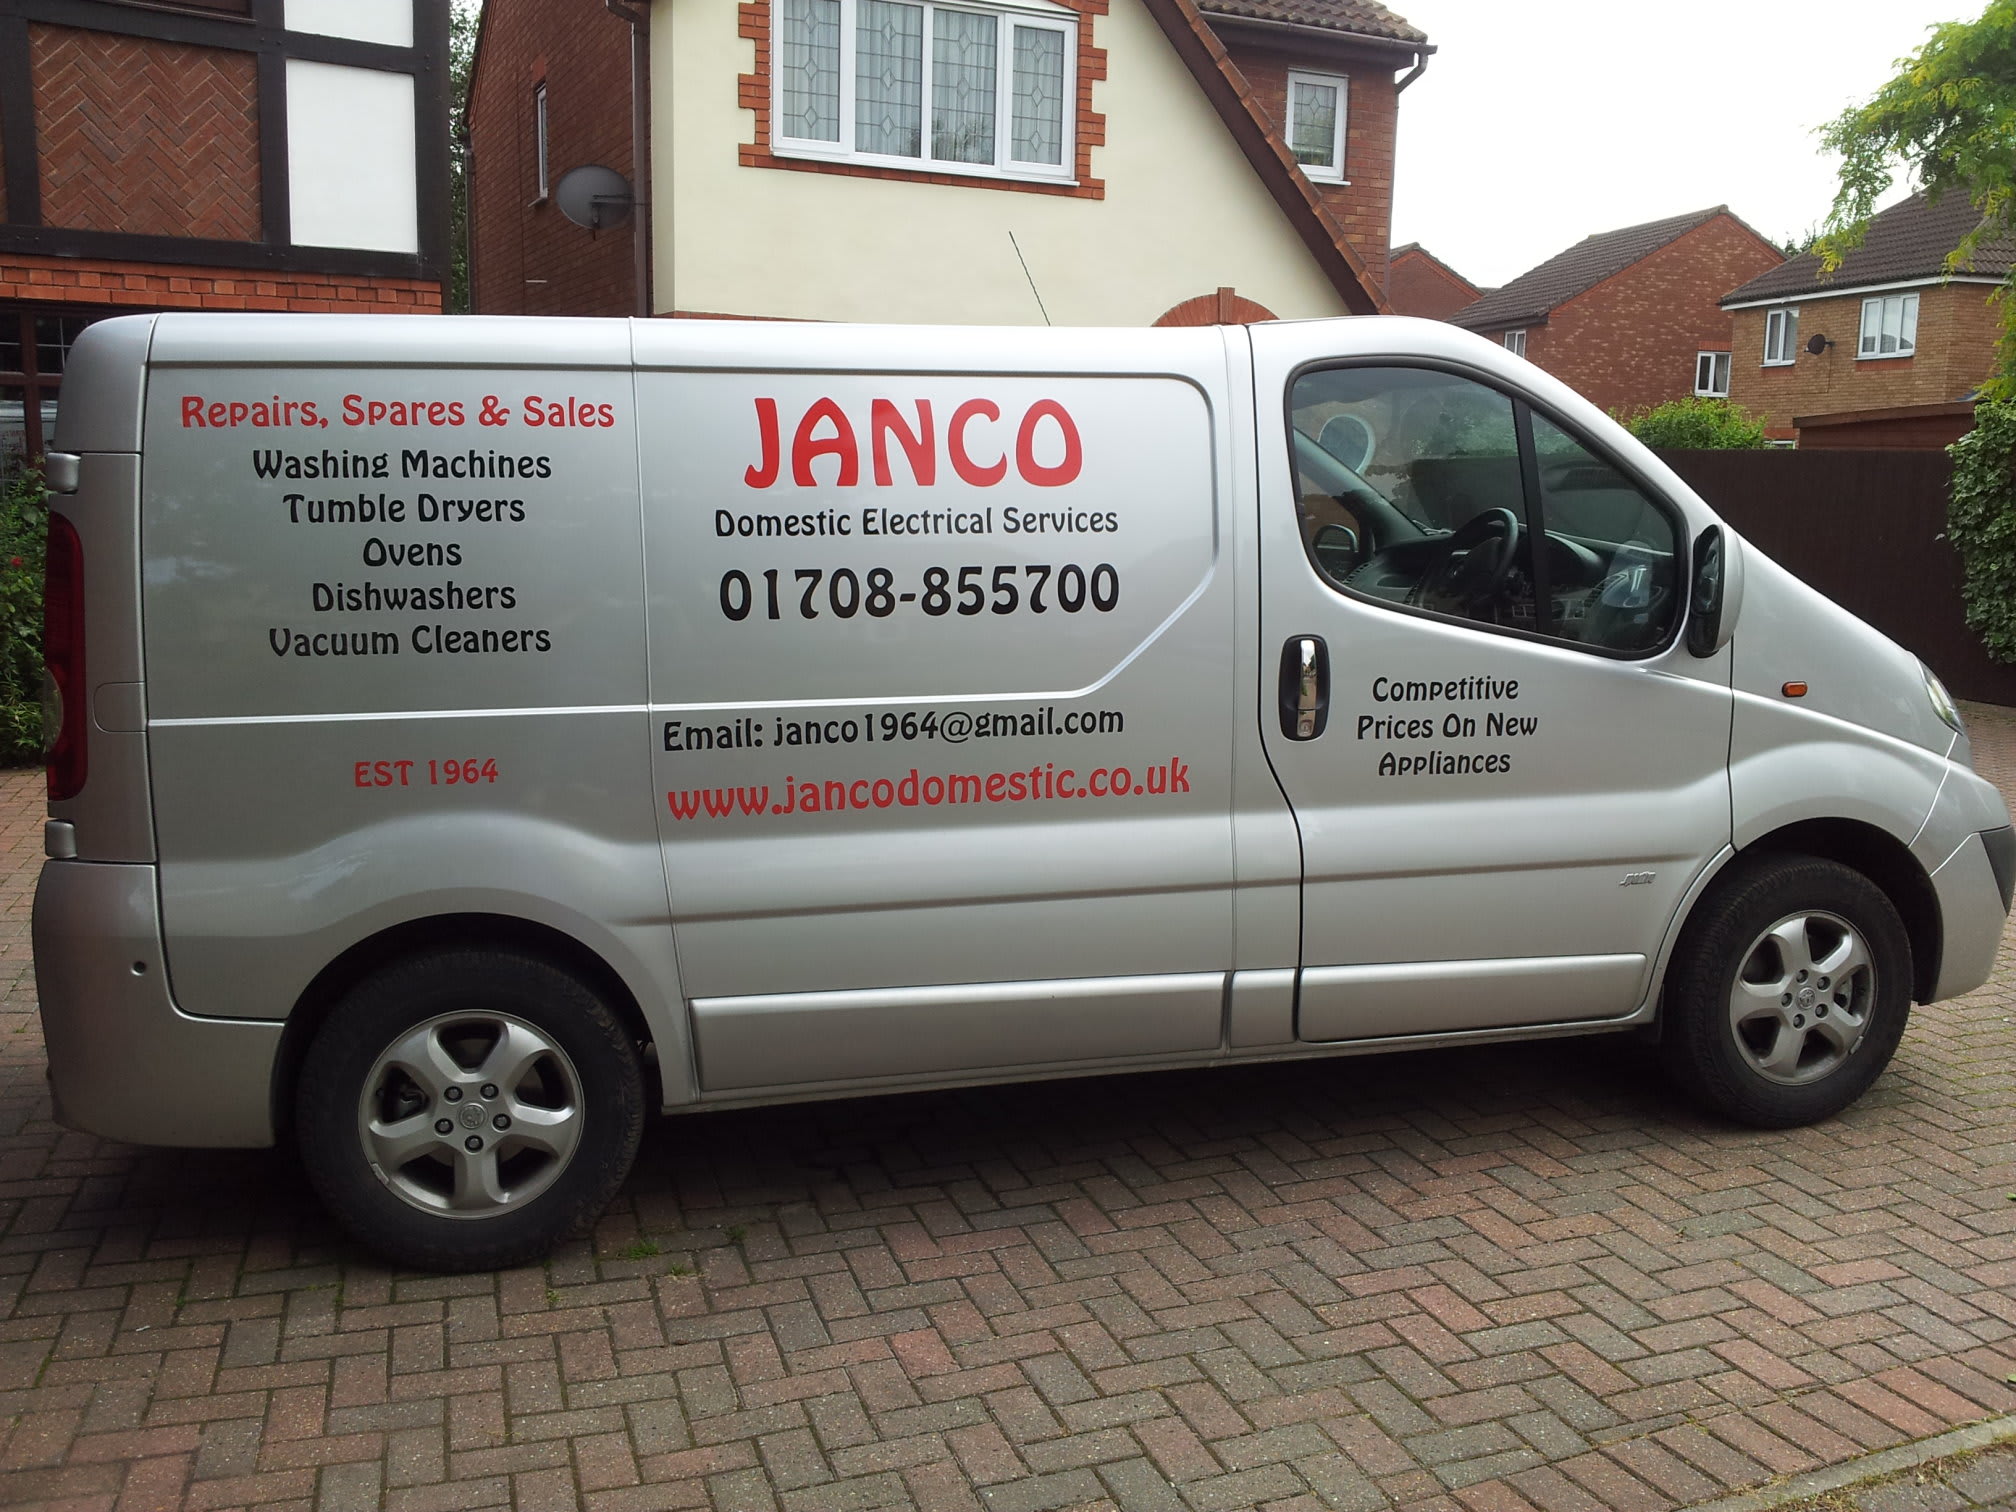 Images Janco Domestic Electrical Services